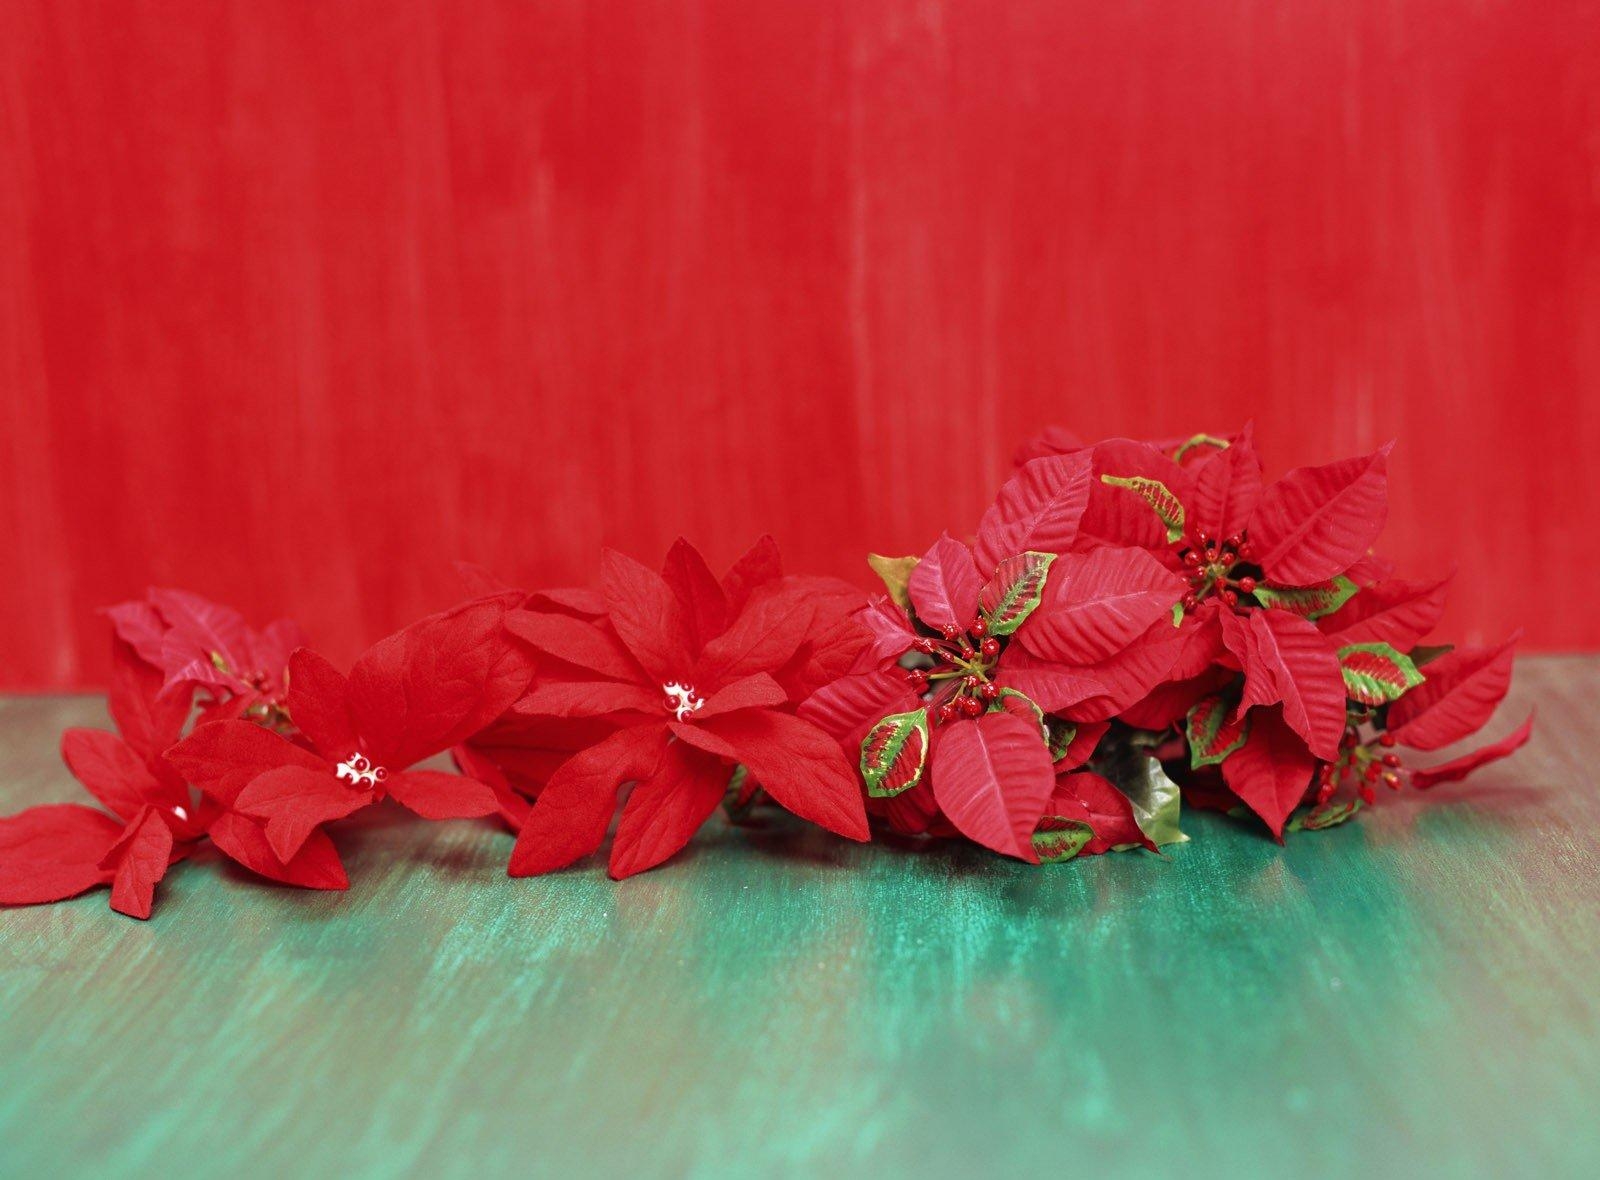 flowers, background, to lie down, lie, poinsettia